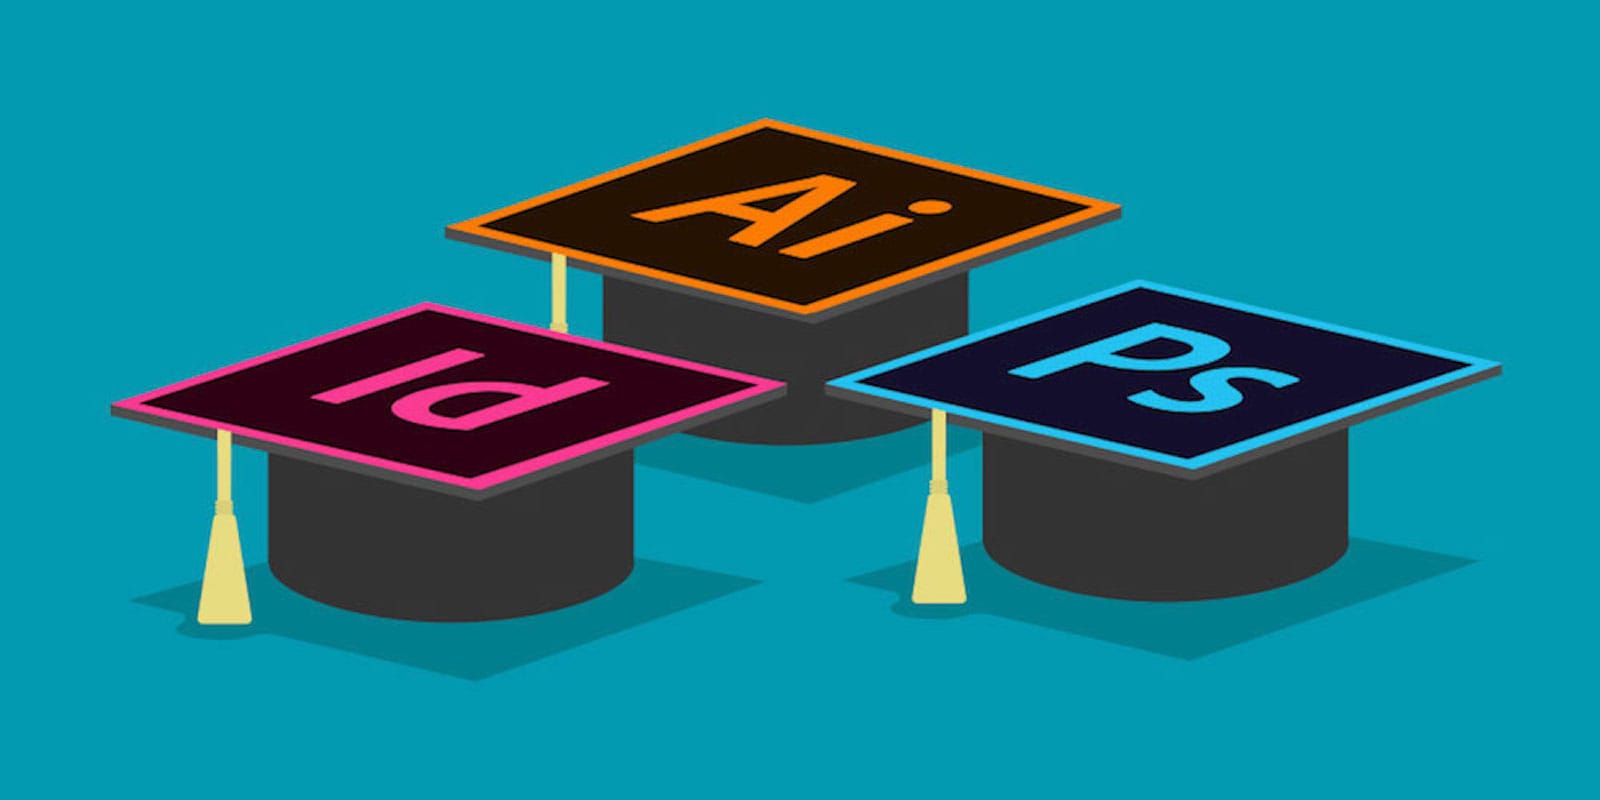 Gain skills in Adobe's graphic design apps, and the credentials to back them up.